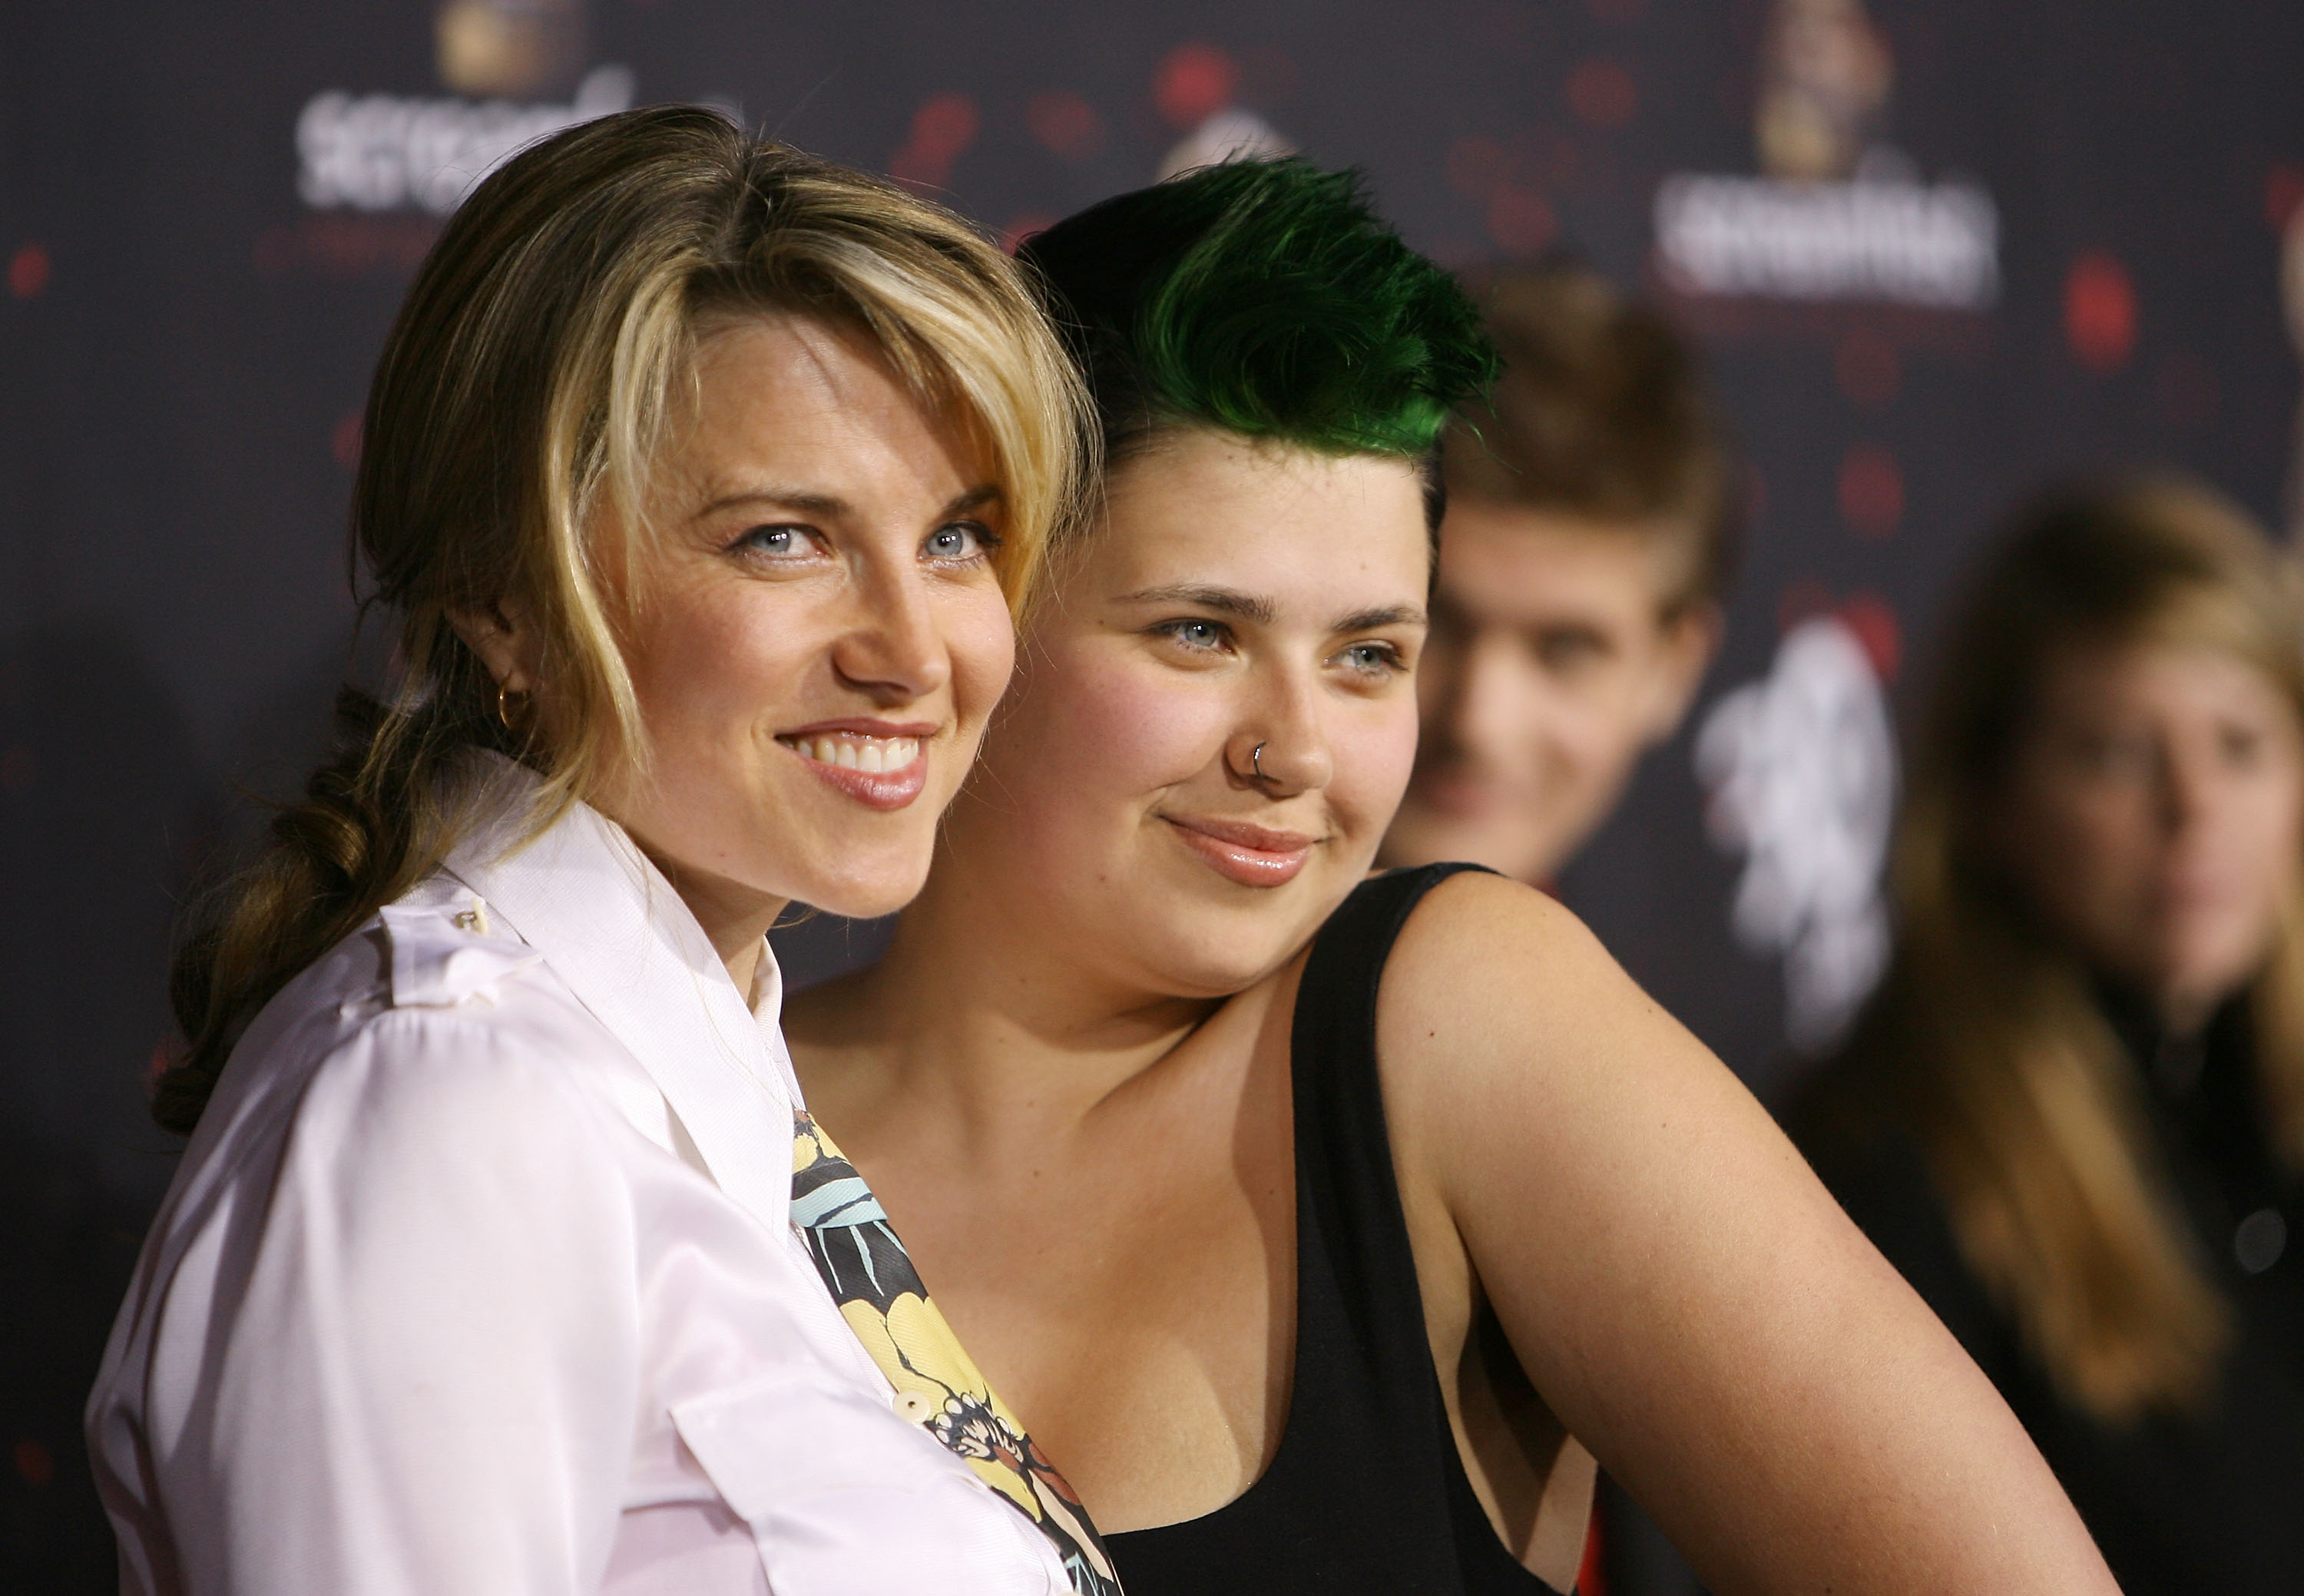 Lucy Lawless and her daughter Daisy attend the Sony Pictures premiere of "30 Days of Night" at Grauman's Chinese Theatre on October 16, 2007, in Hollywood, California. | Source: Getty Images